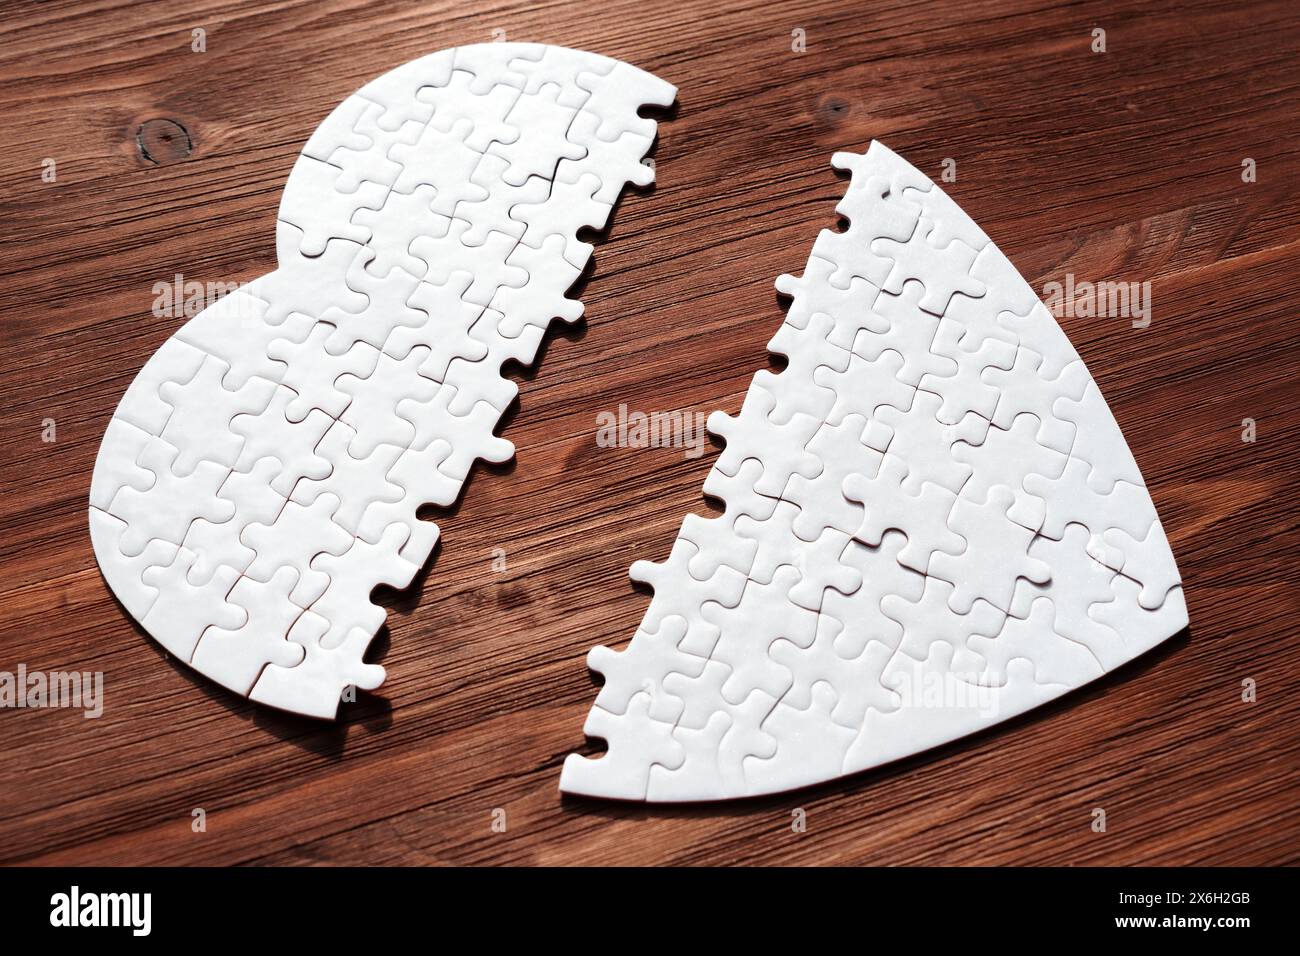 White heart-shaped puzzle, split in half, lying on a textured wooden table. Separation, longing or incomplete love related concept. Stock Photo